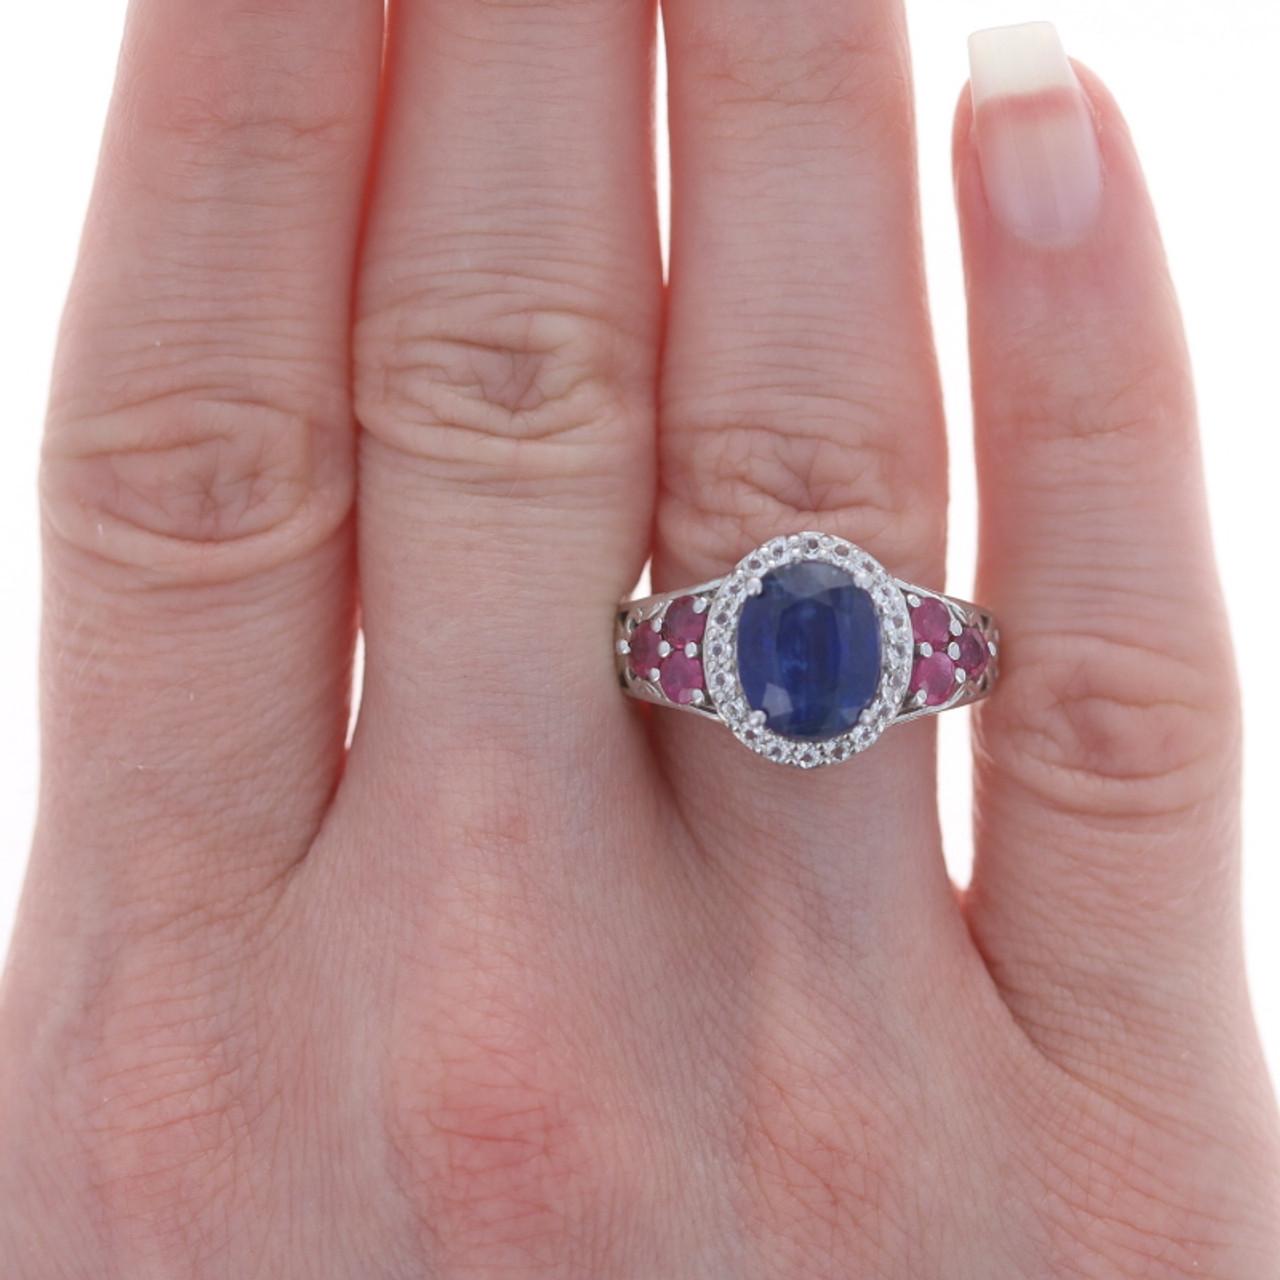 Sterling Silver Kyanite, Ruby, & White Topaz Halo Ring 925 Oval Cut

Stone Information:
Natural Kyanite
Cut: Oval
Color: Blue

Natural Rubies
Treatment: Lead Glass Filled & Heated
Cut: Round
Color: Pinkish Red

Natural White Topaz
Cut: